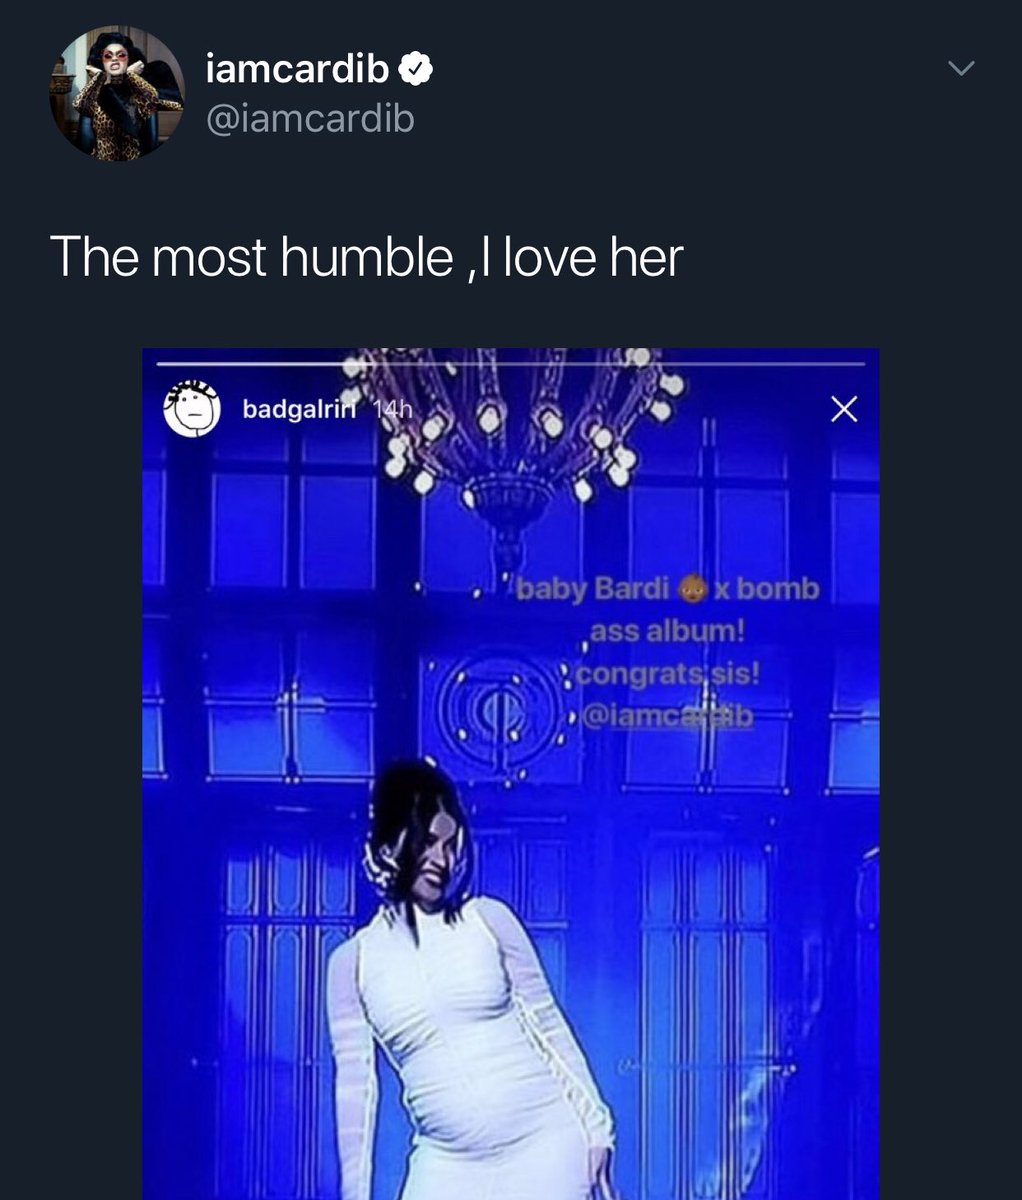 April 8th, 2018: Cardi calls Rihanna the “most humble” & says she loves her in response to Rihanna’s congratulations.